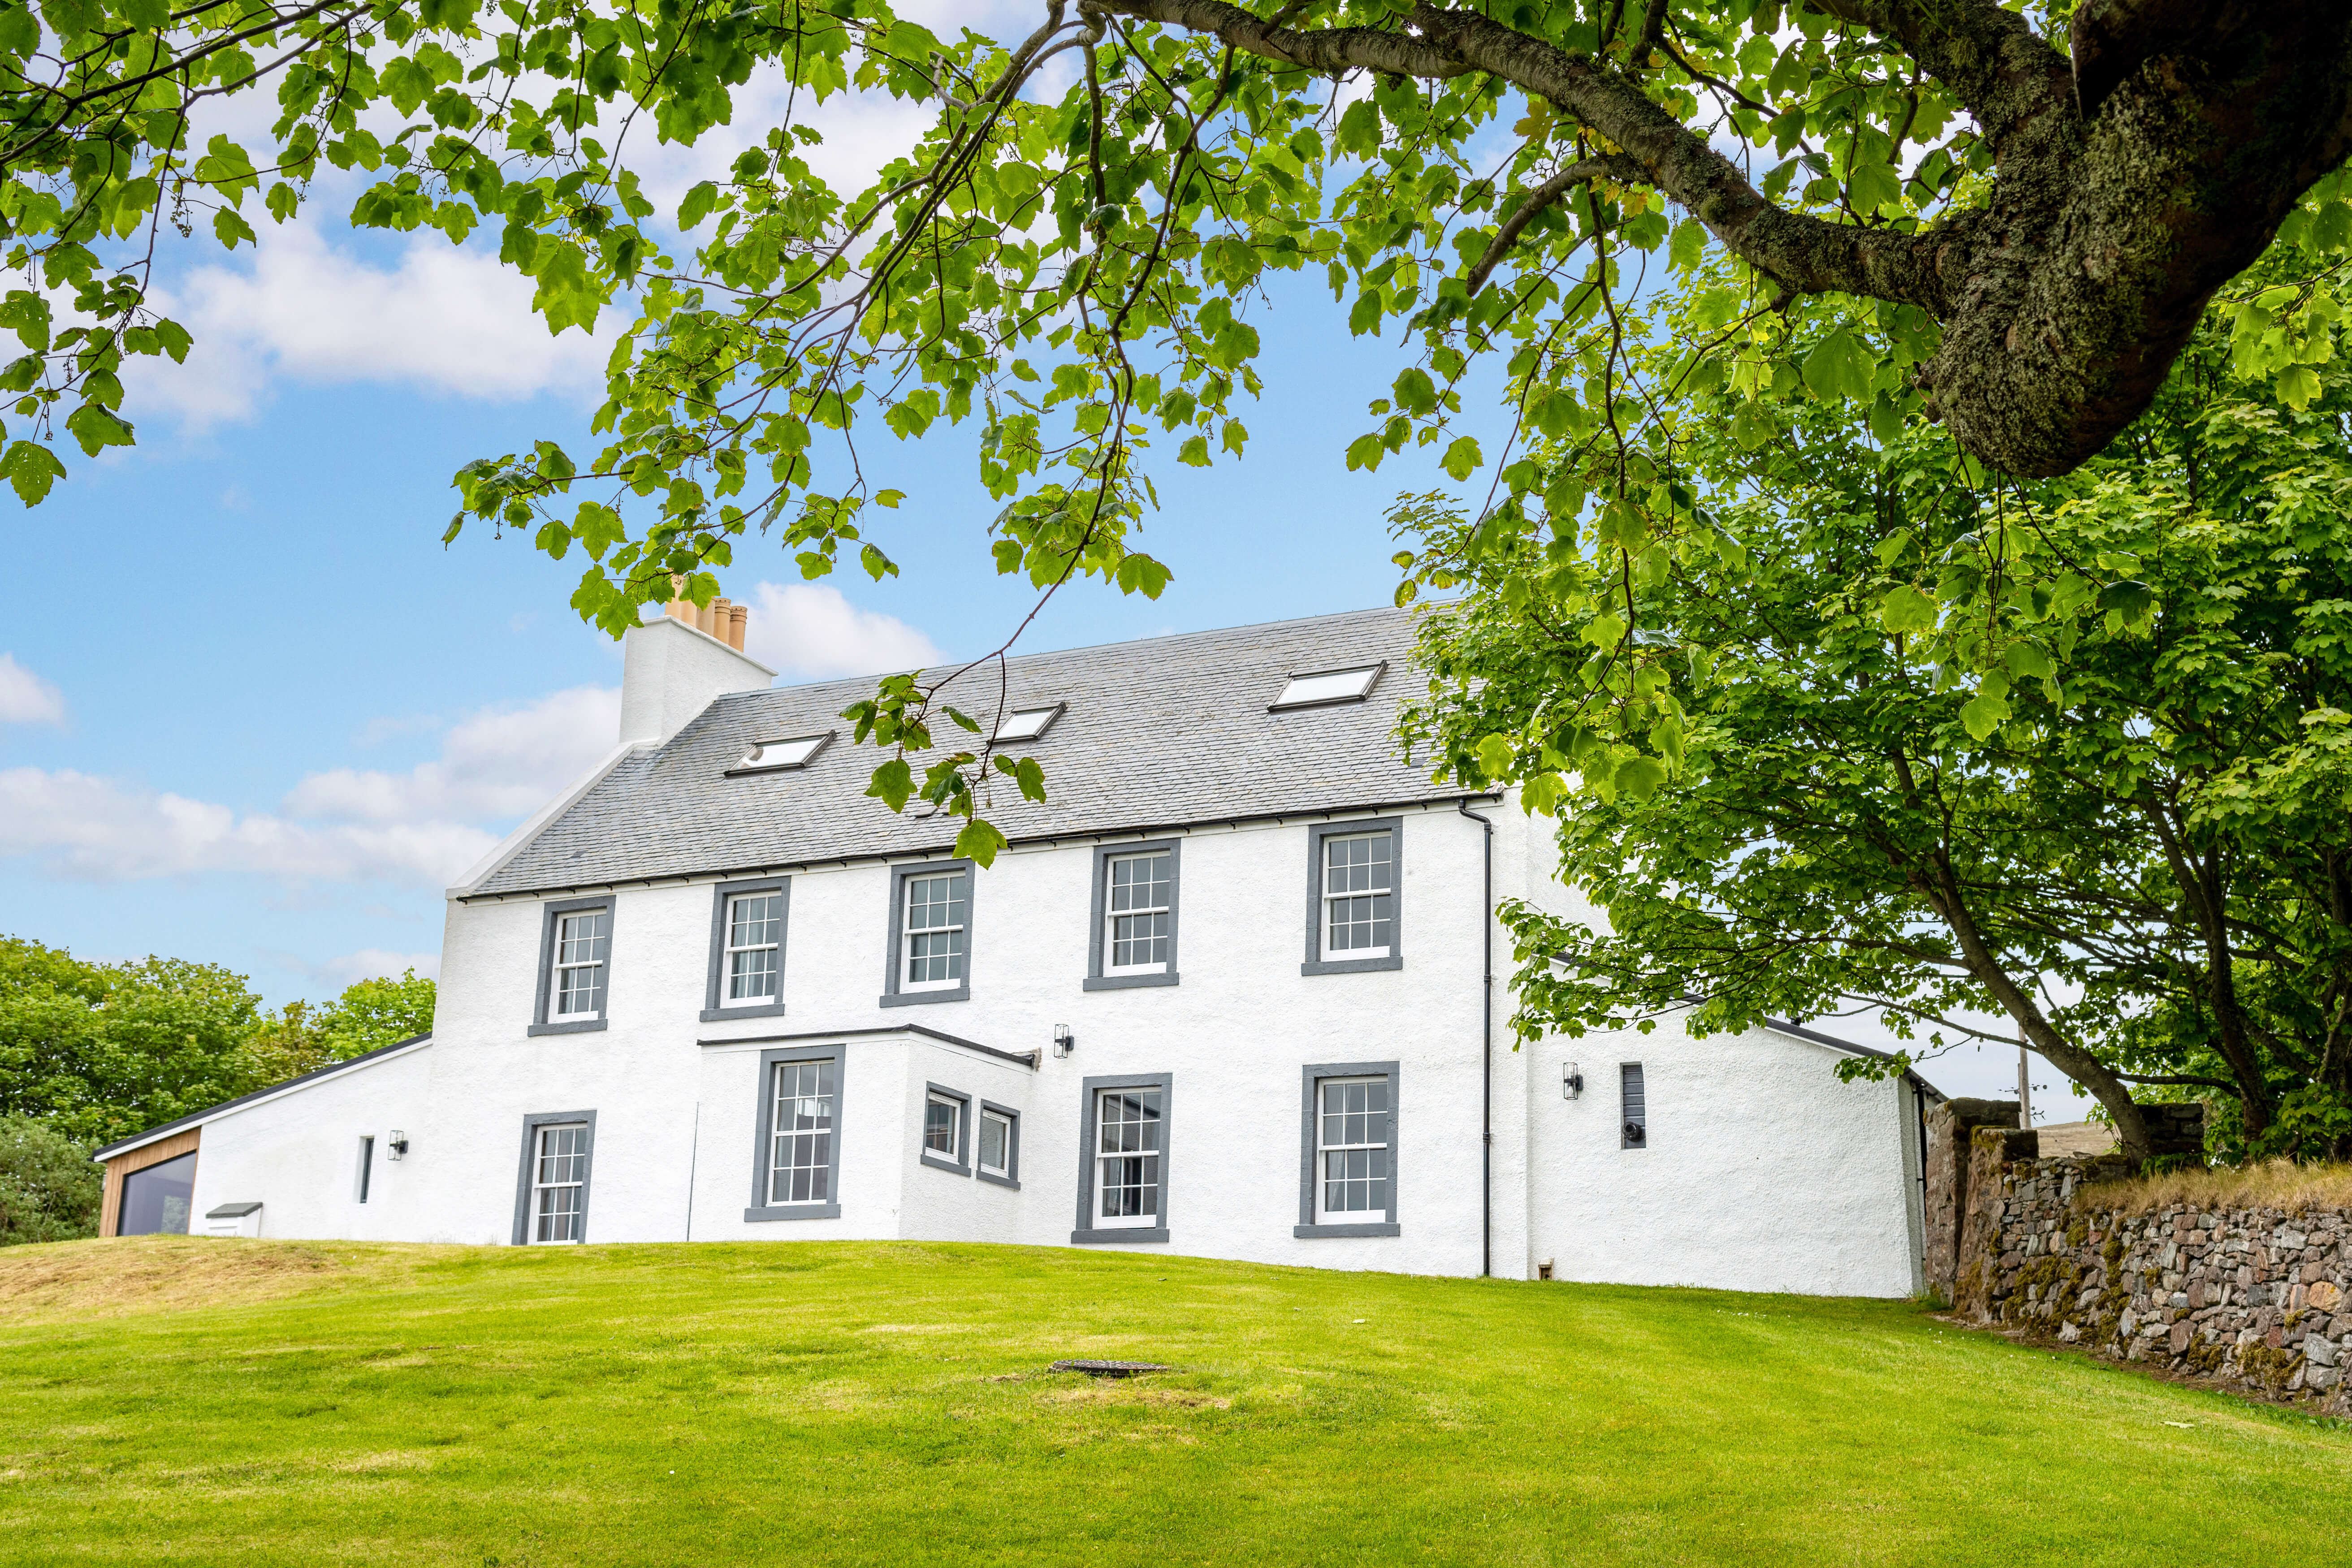 Voe House - located in lovely grounds